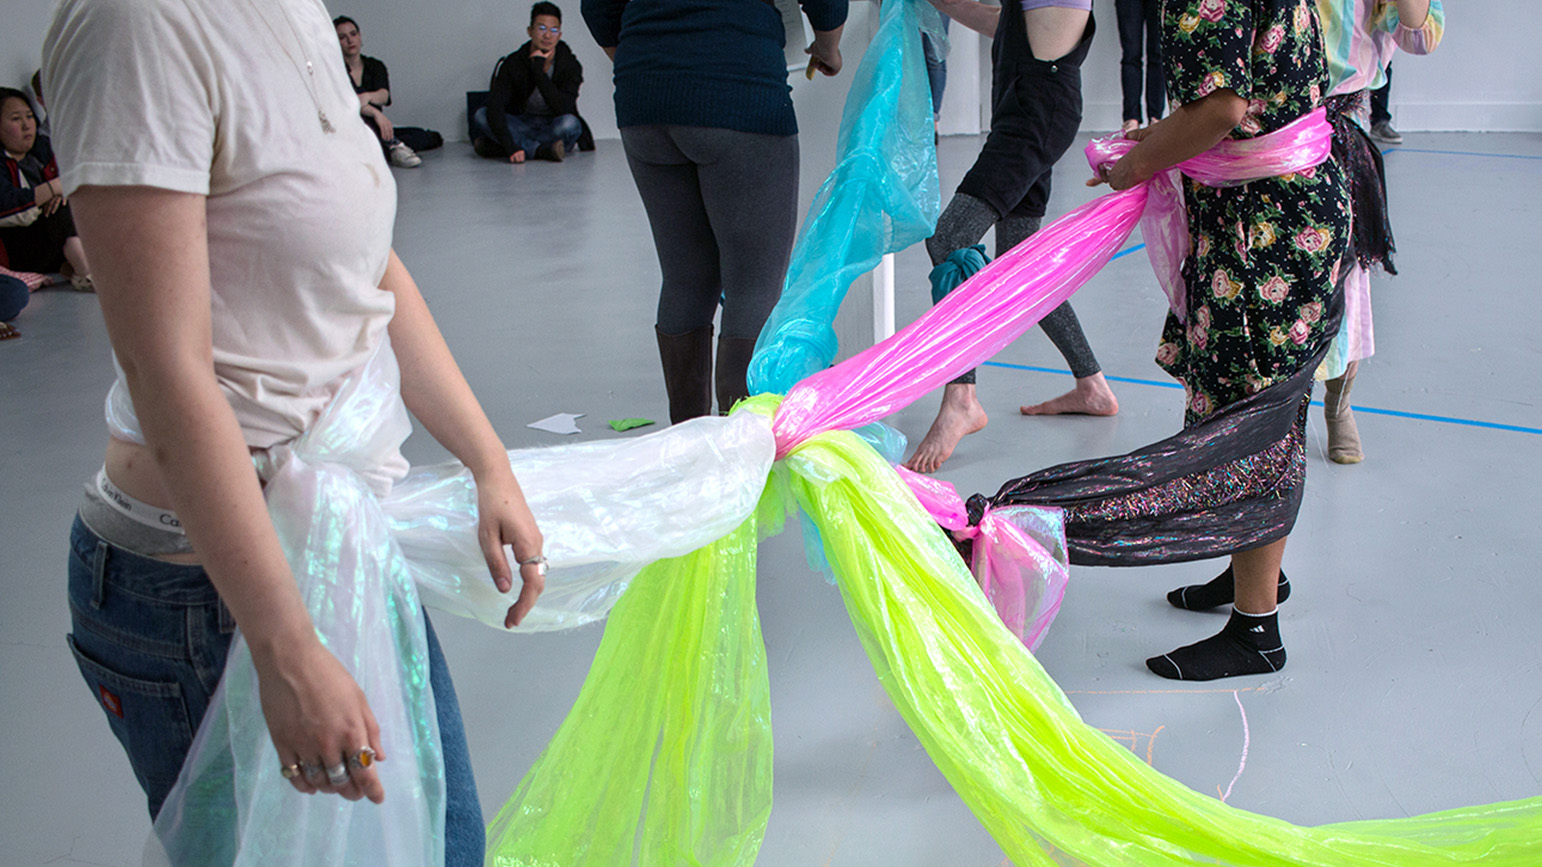 A group of people connected at the waste by brightly colored fabric